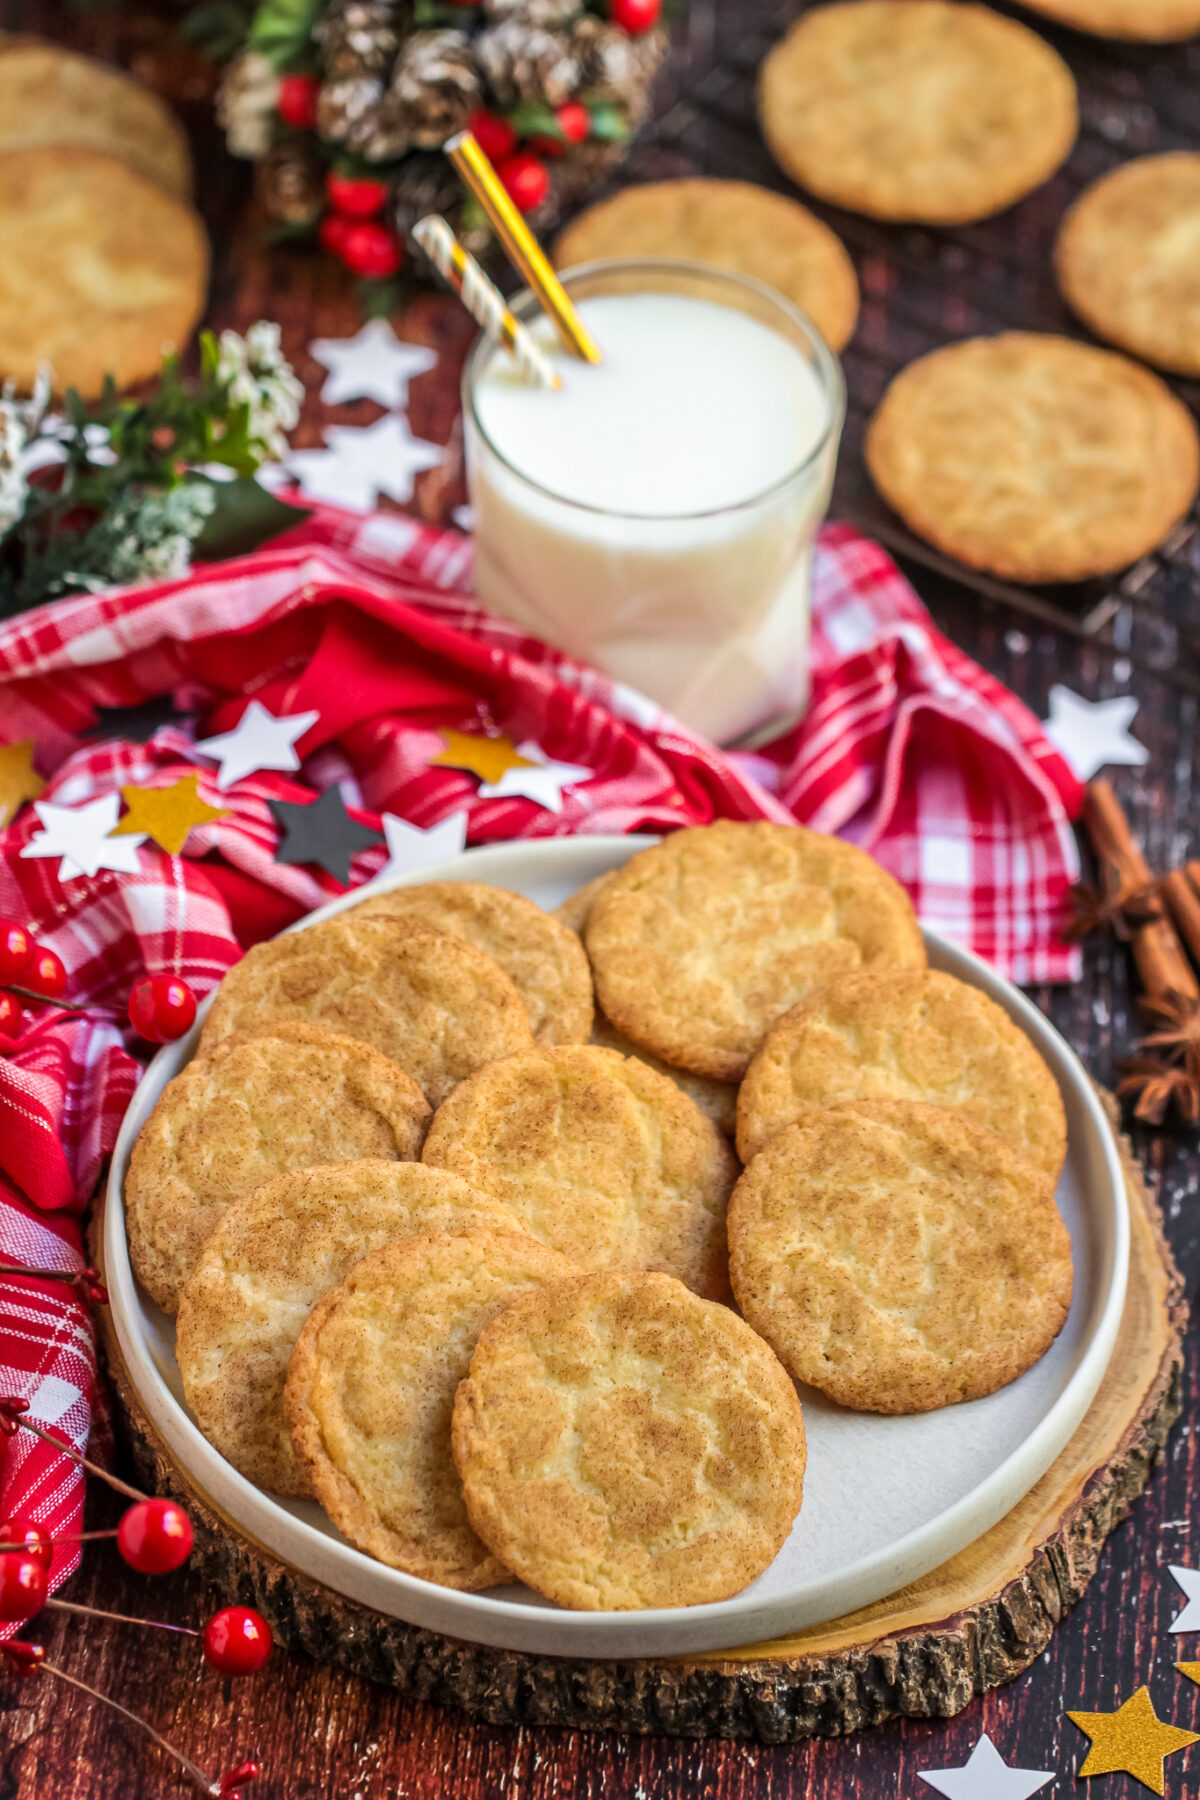 Looking for the perfect recipe for snickerdoodles? These delicious, soft & chewy cinnamon cookies are perfect for holiday celebrations!